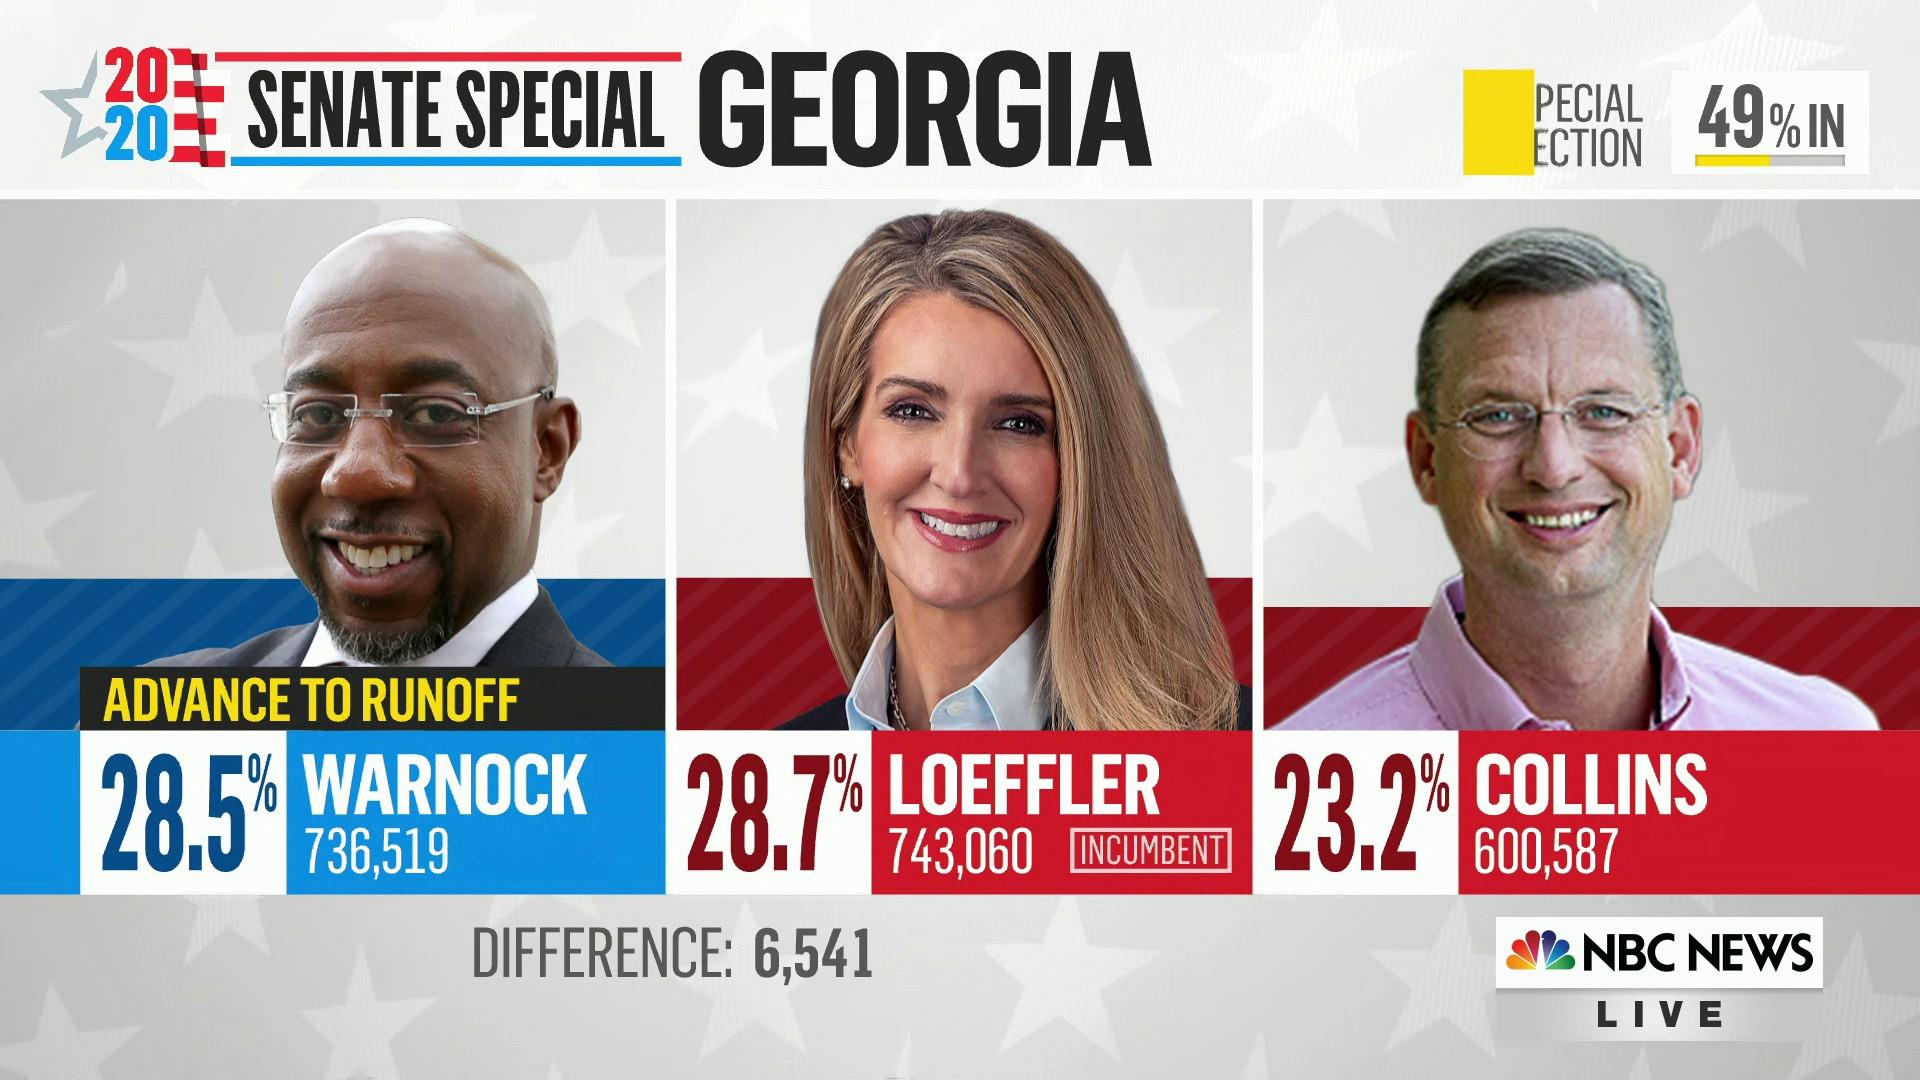 Nbc News Projects Raphael Warnock Will Advance To Runoff In Georgia Senate Special Election